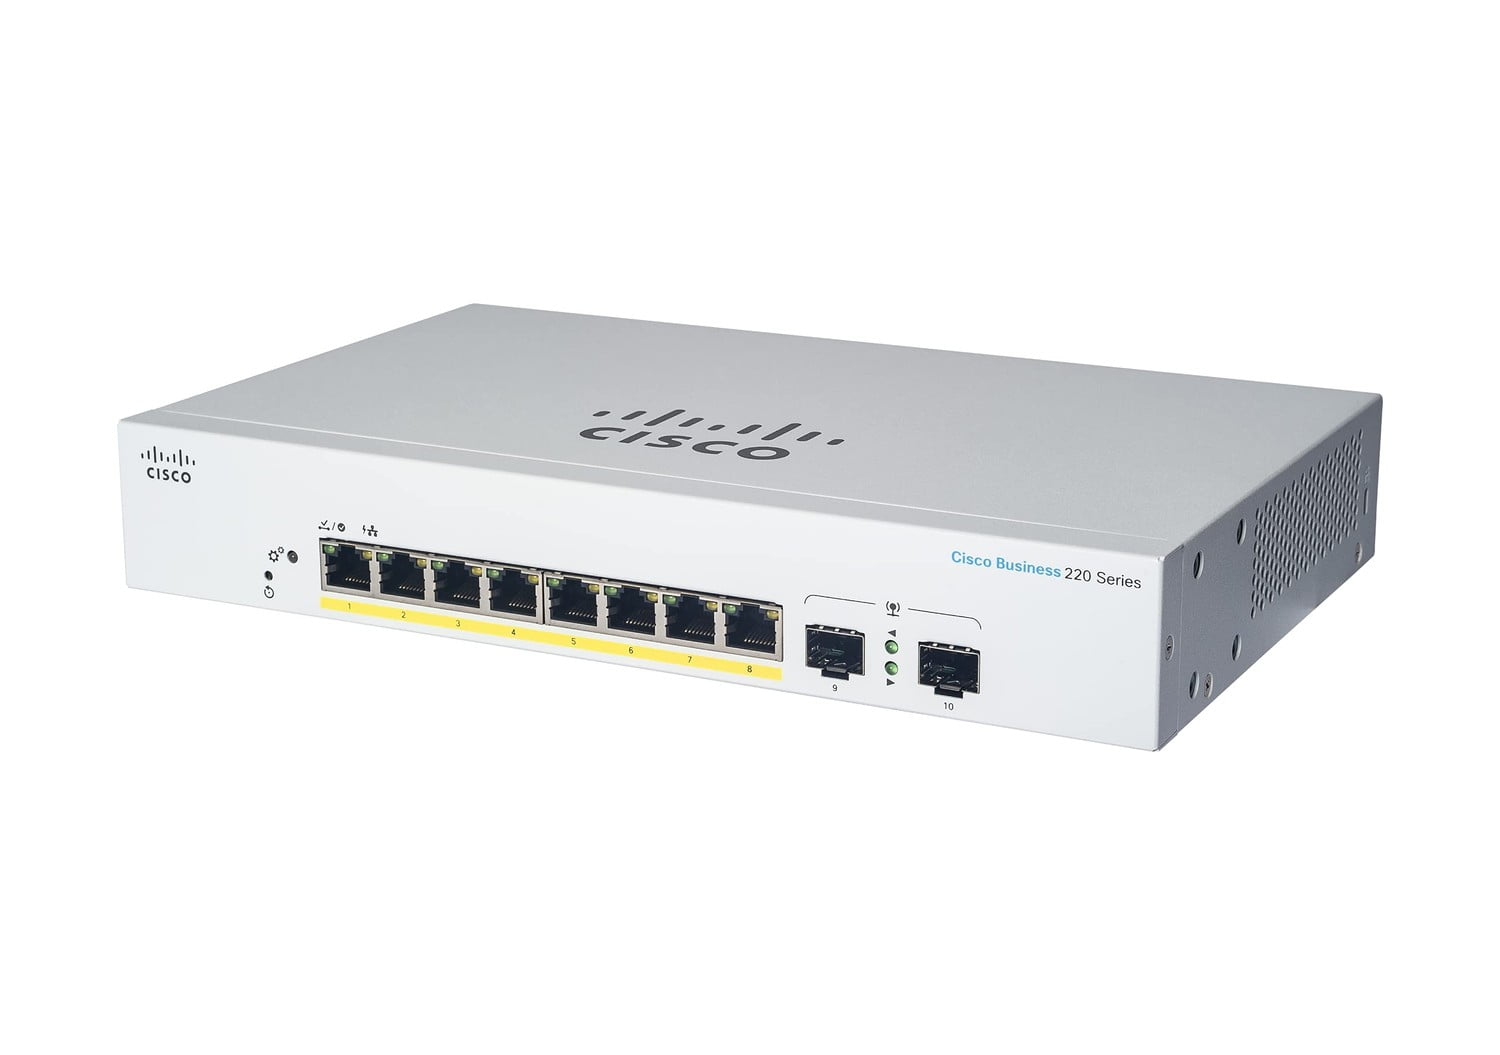 Picture of Cisco Systems CBS220-8P-E-2G-NA 8 Port GE PoE 2 x 1G SFP Smart Ethernet Switch